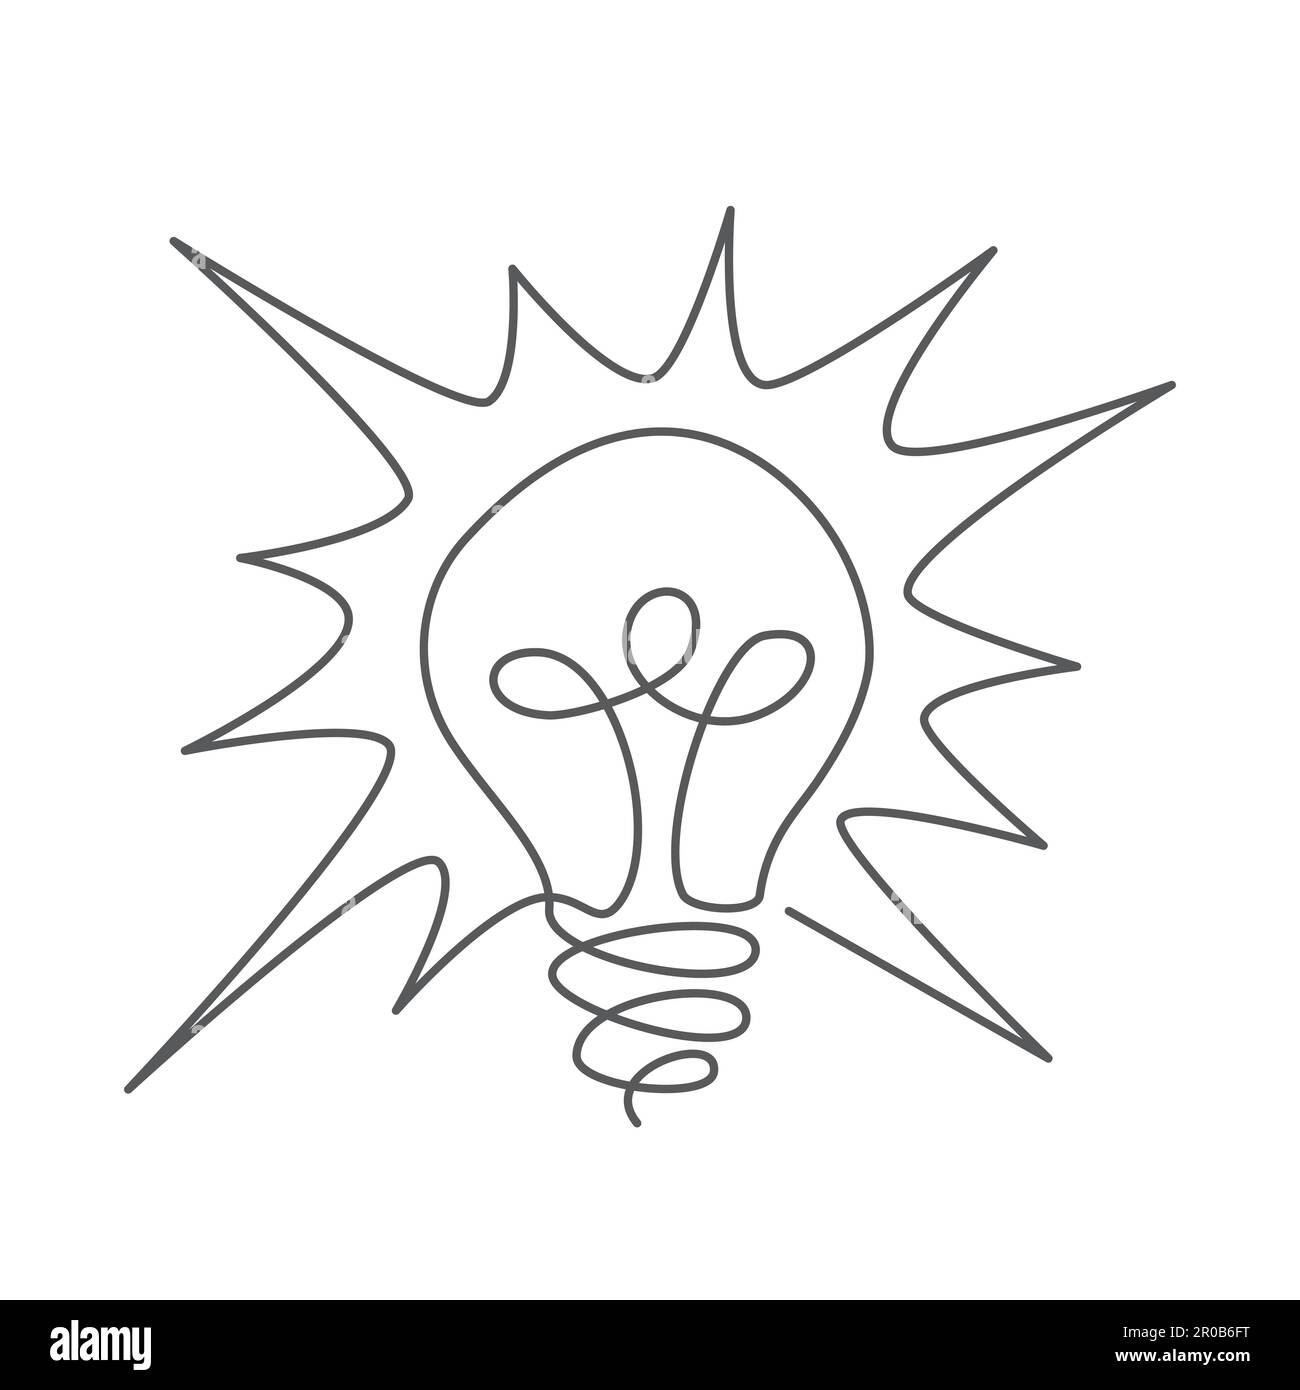 Light bulb One line drawing on white background Stock Vector